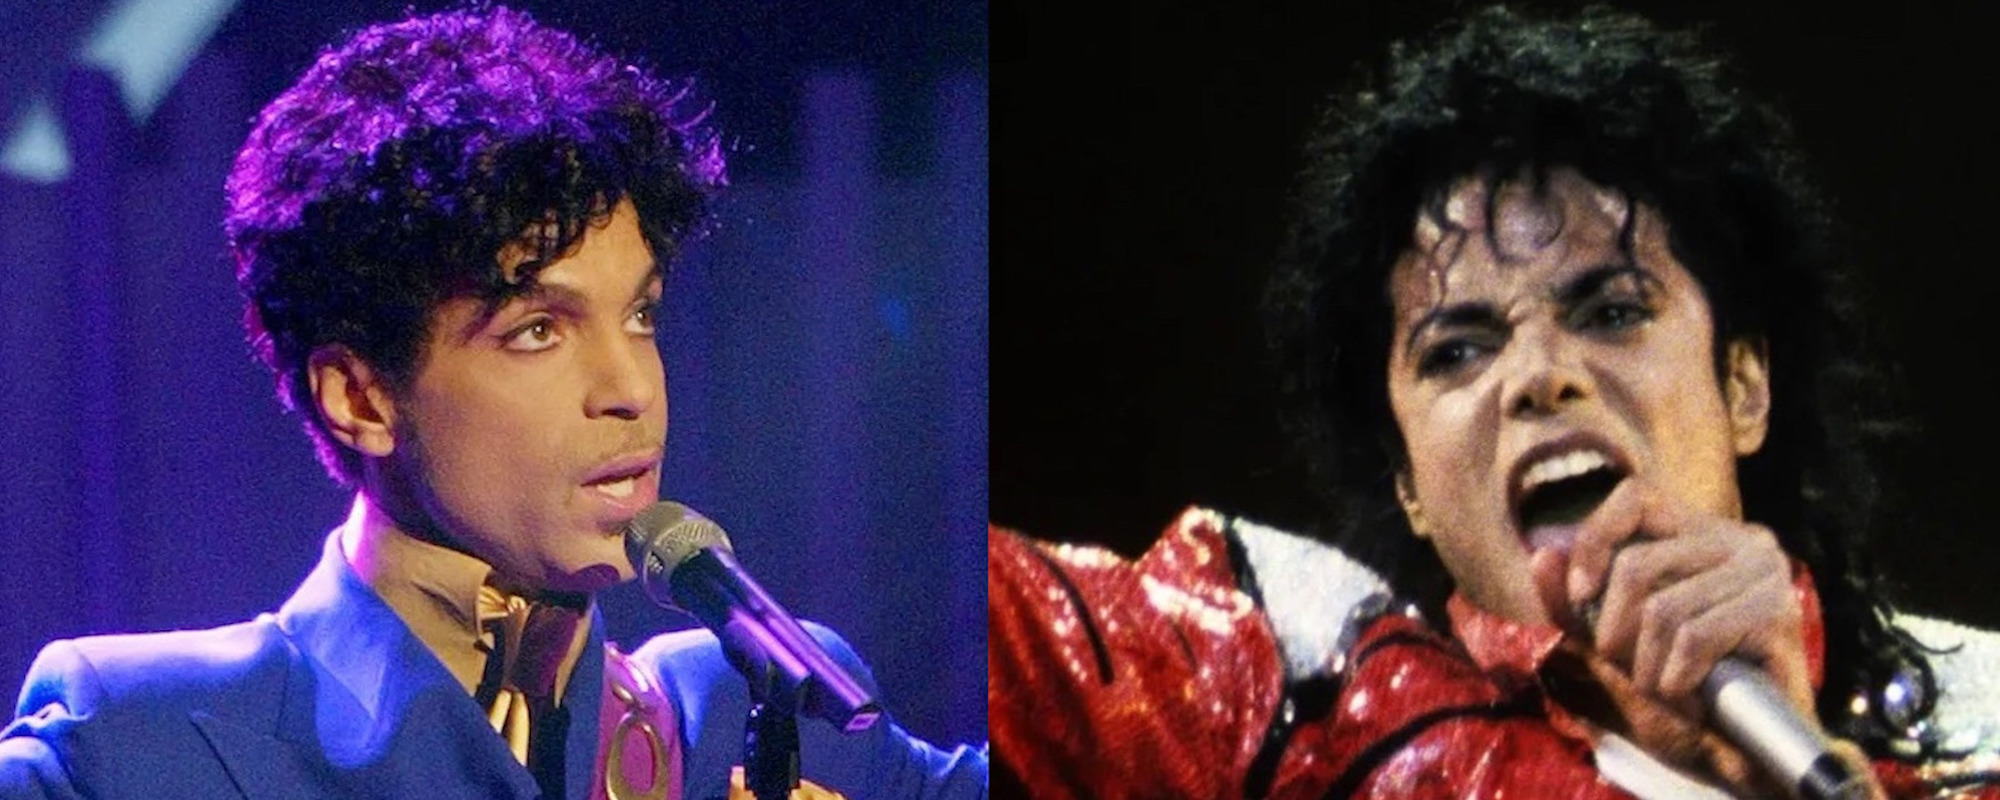 The Story Behind Prince and Michael Jackson’s Decades-Long Feud